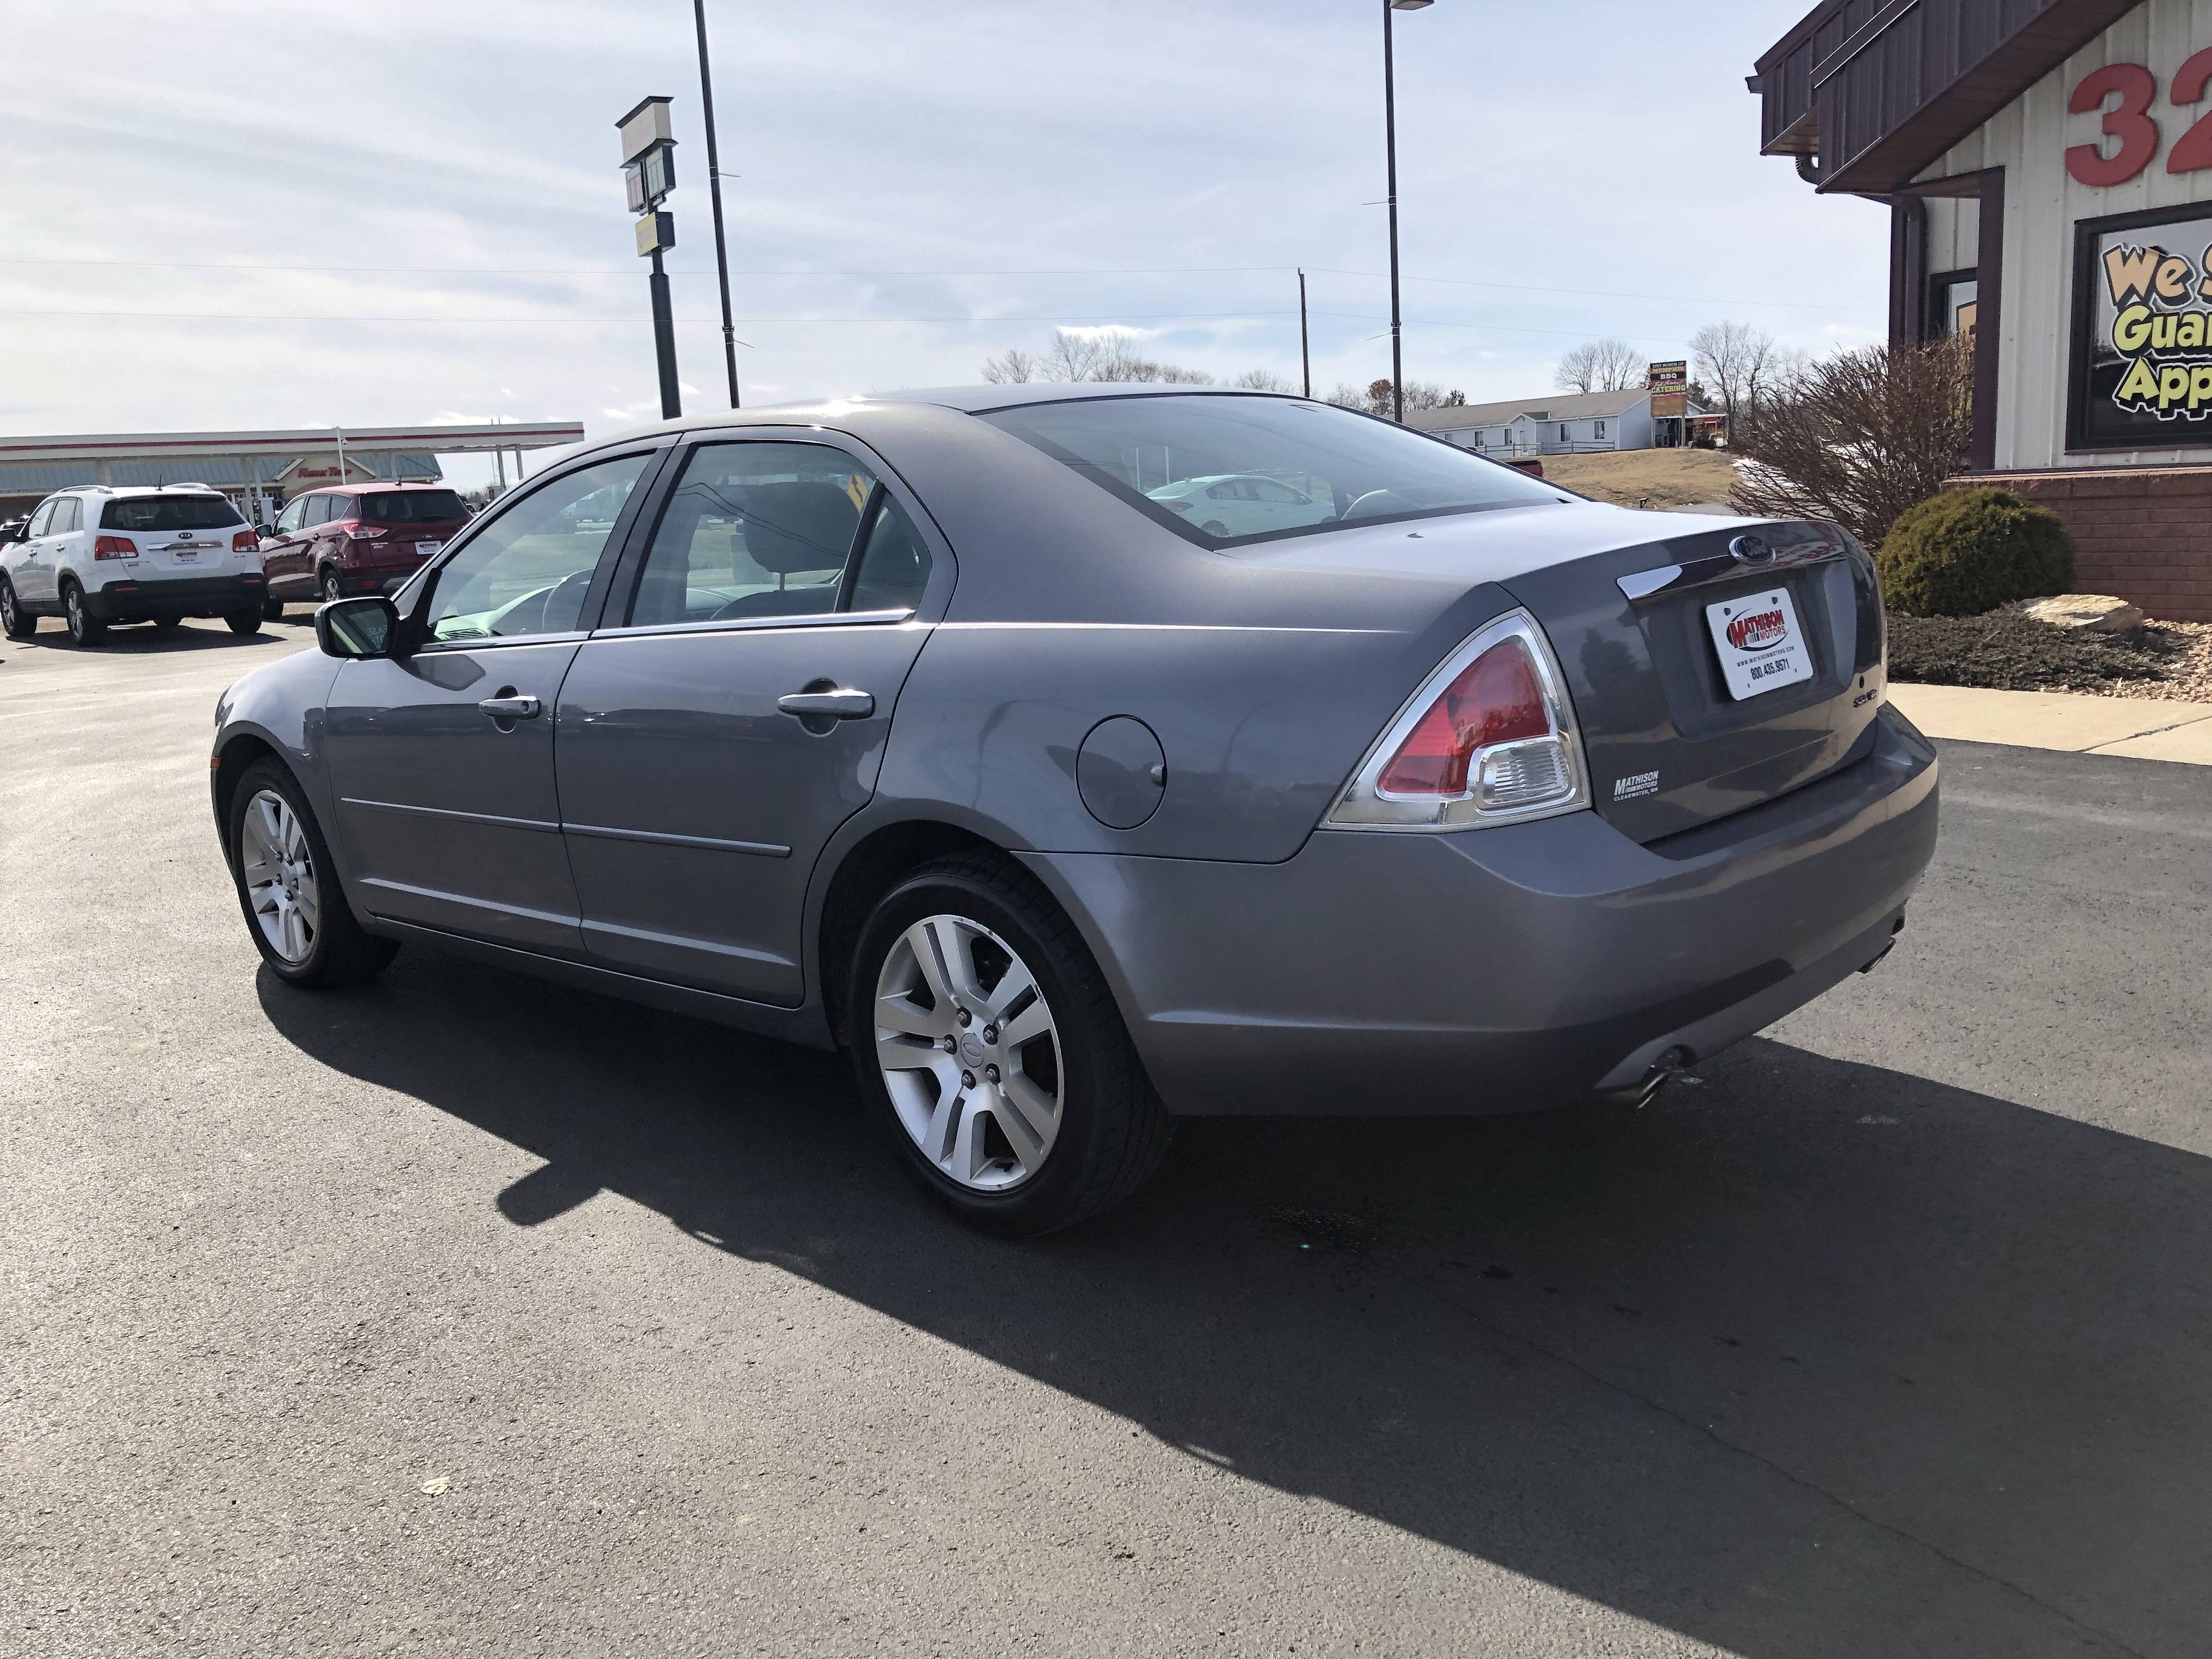 Used 2006 FORD FUSION SEL for sale in MATHISON 22369